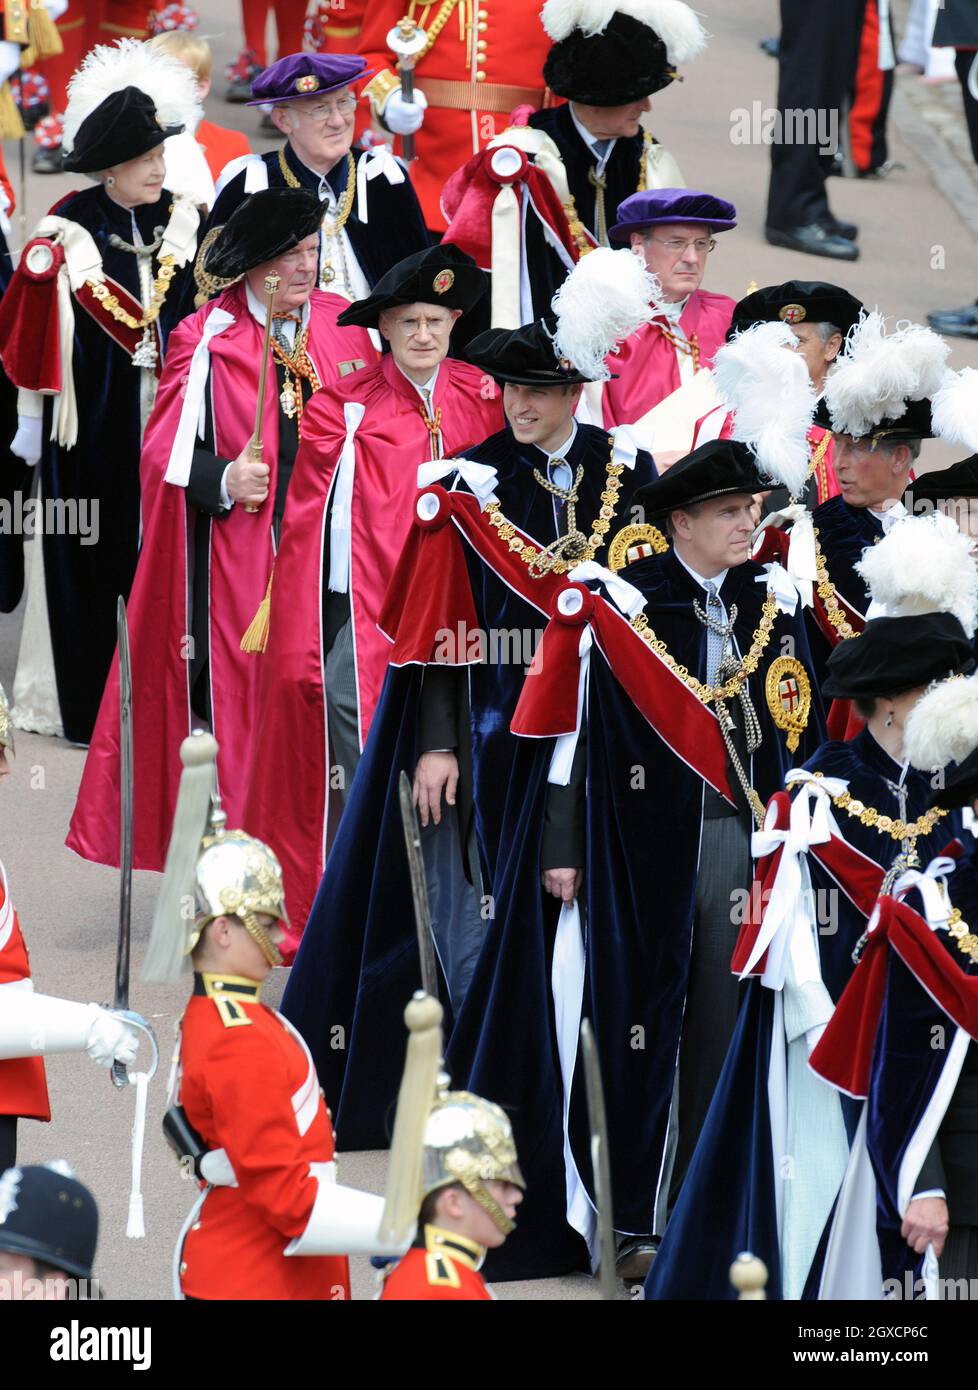 Queen Elizabeth ll and other Royal Family members arrive for the Order